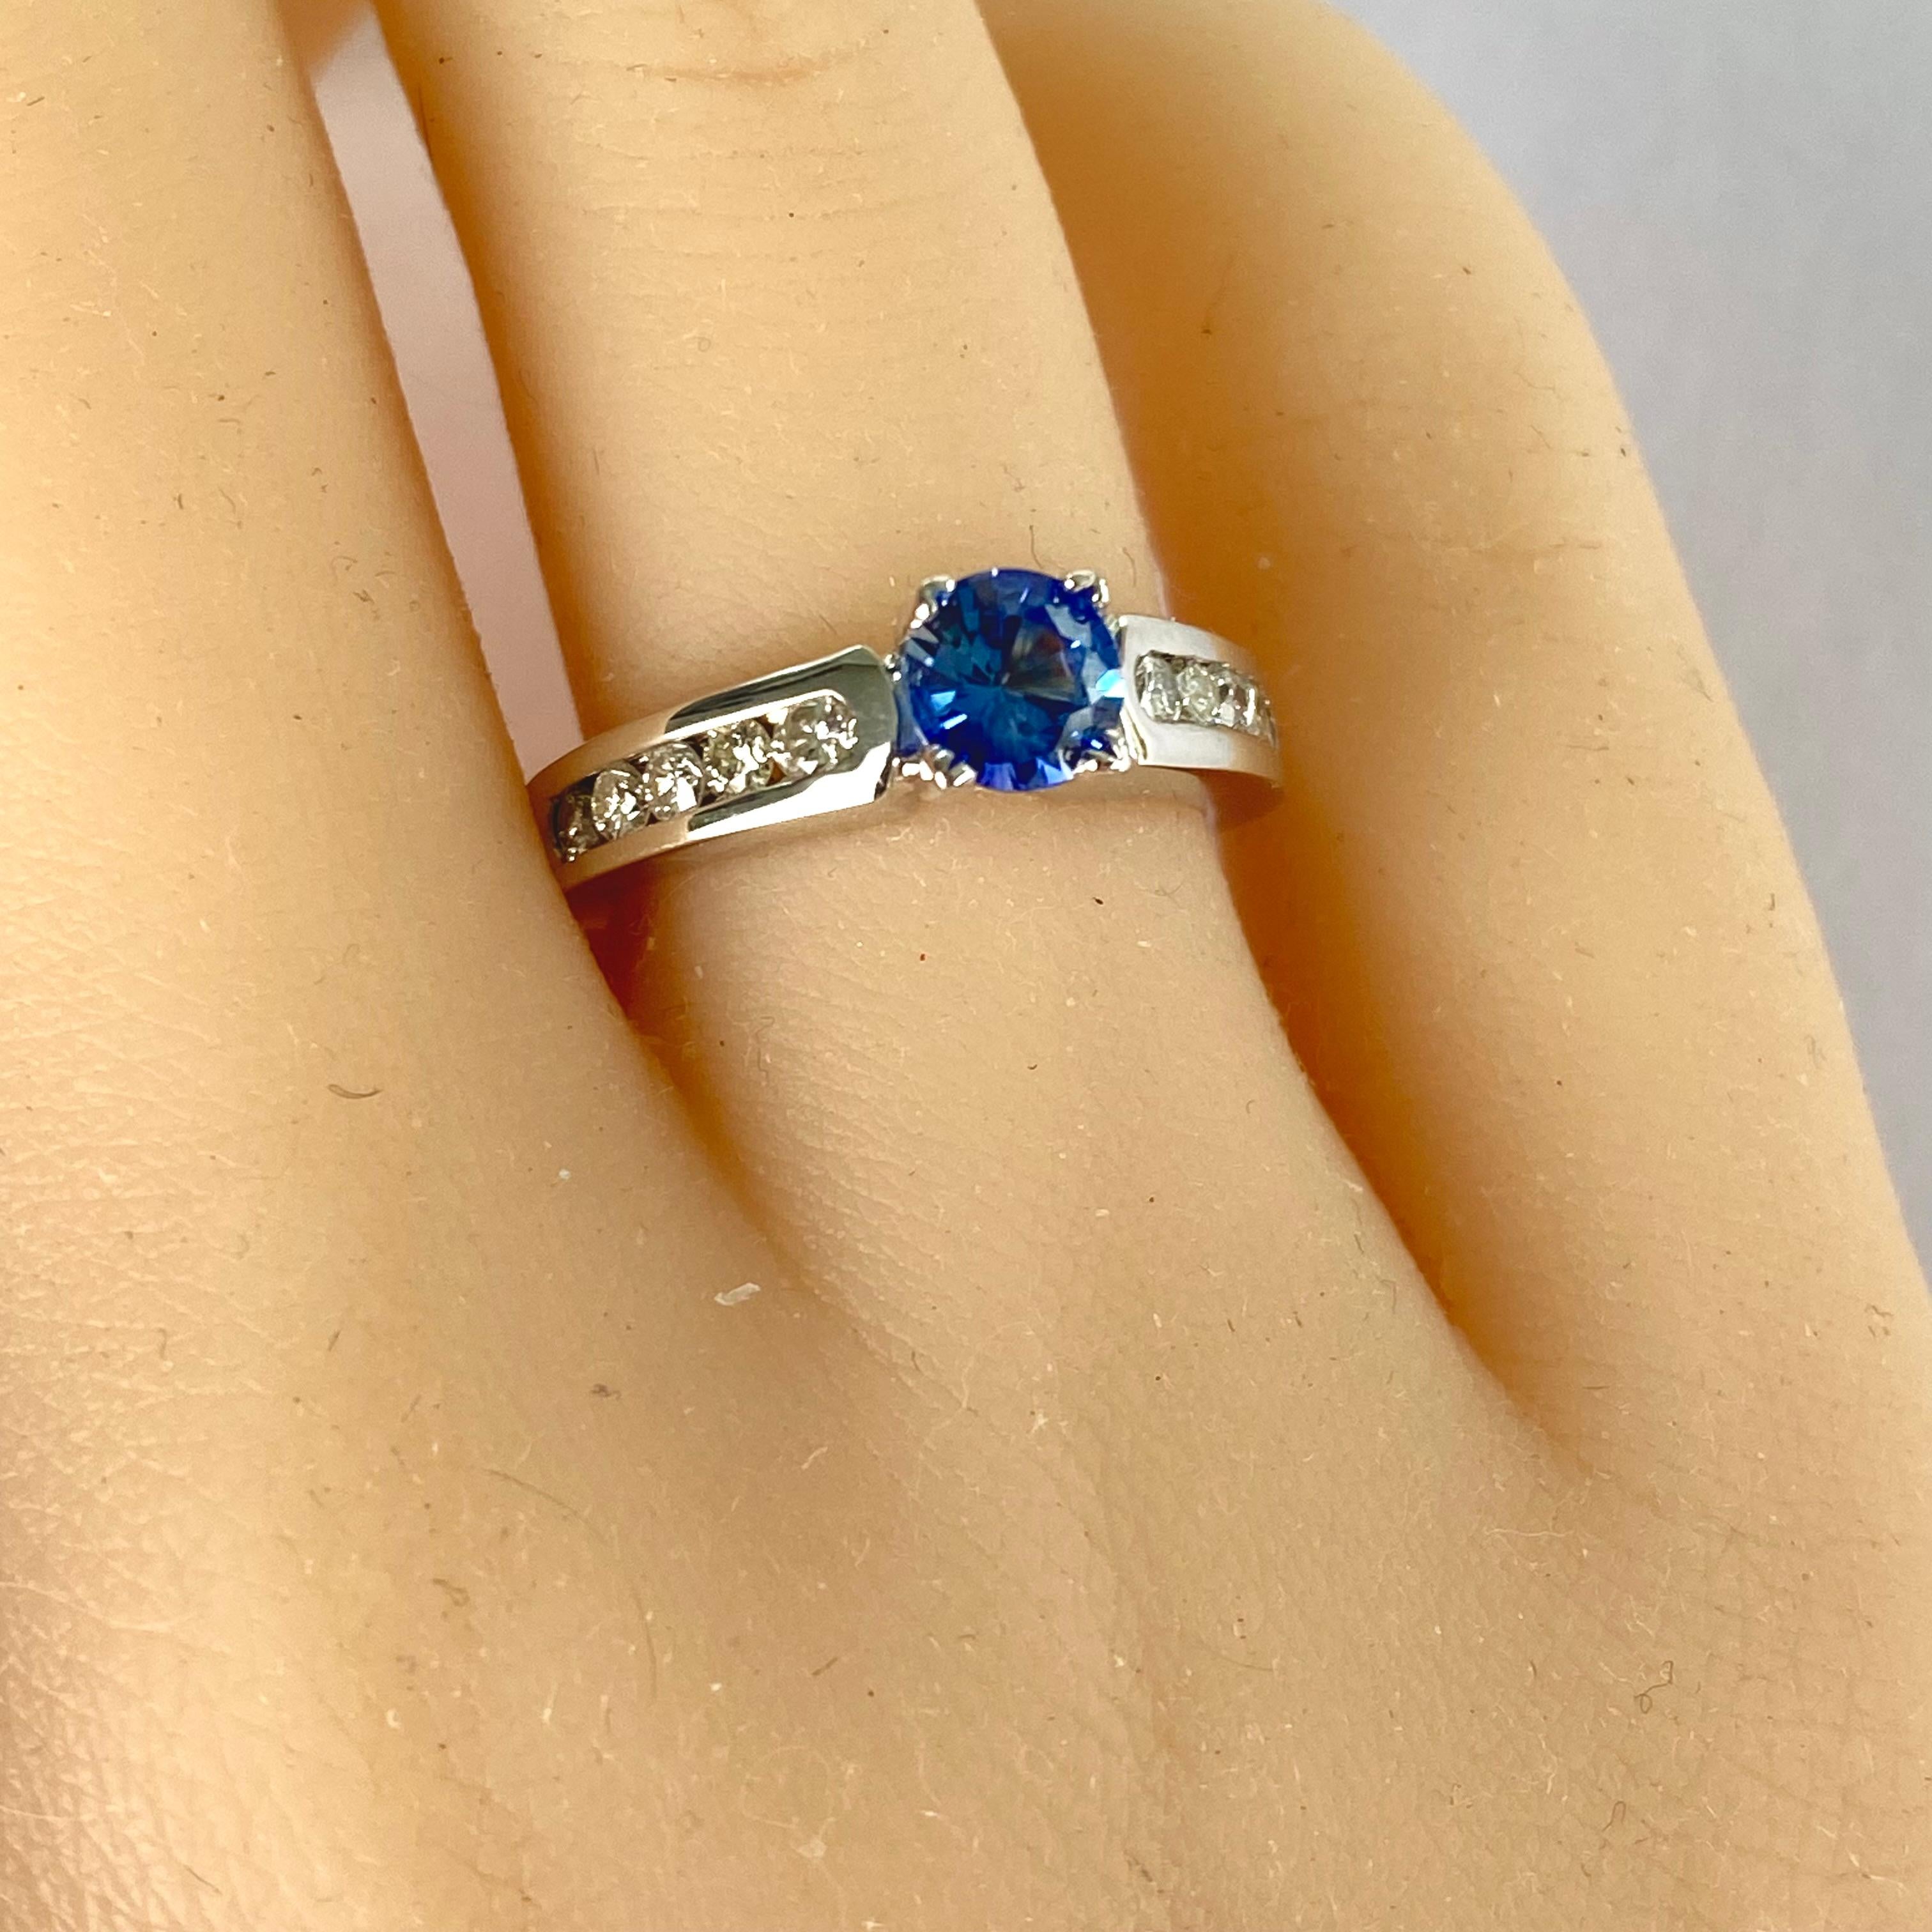 Introducing our exquisite 14 Karat White Gold Diamond and Ceylon Sapphire Engagement Ring, a dazzling symbol of everlasting love and commitment. Crafted with precision and elegance, this stunning ring is designed to capture hearts and evoke timeless